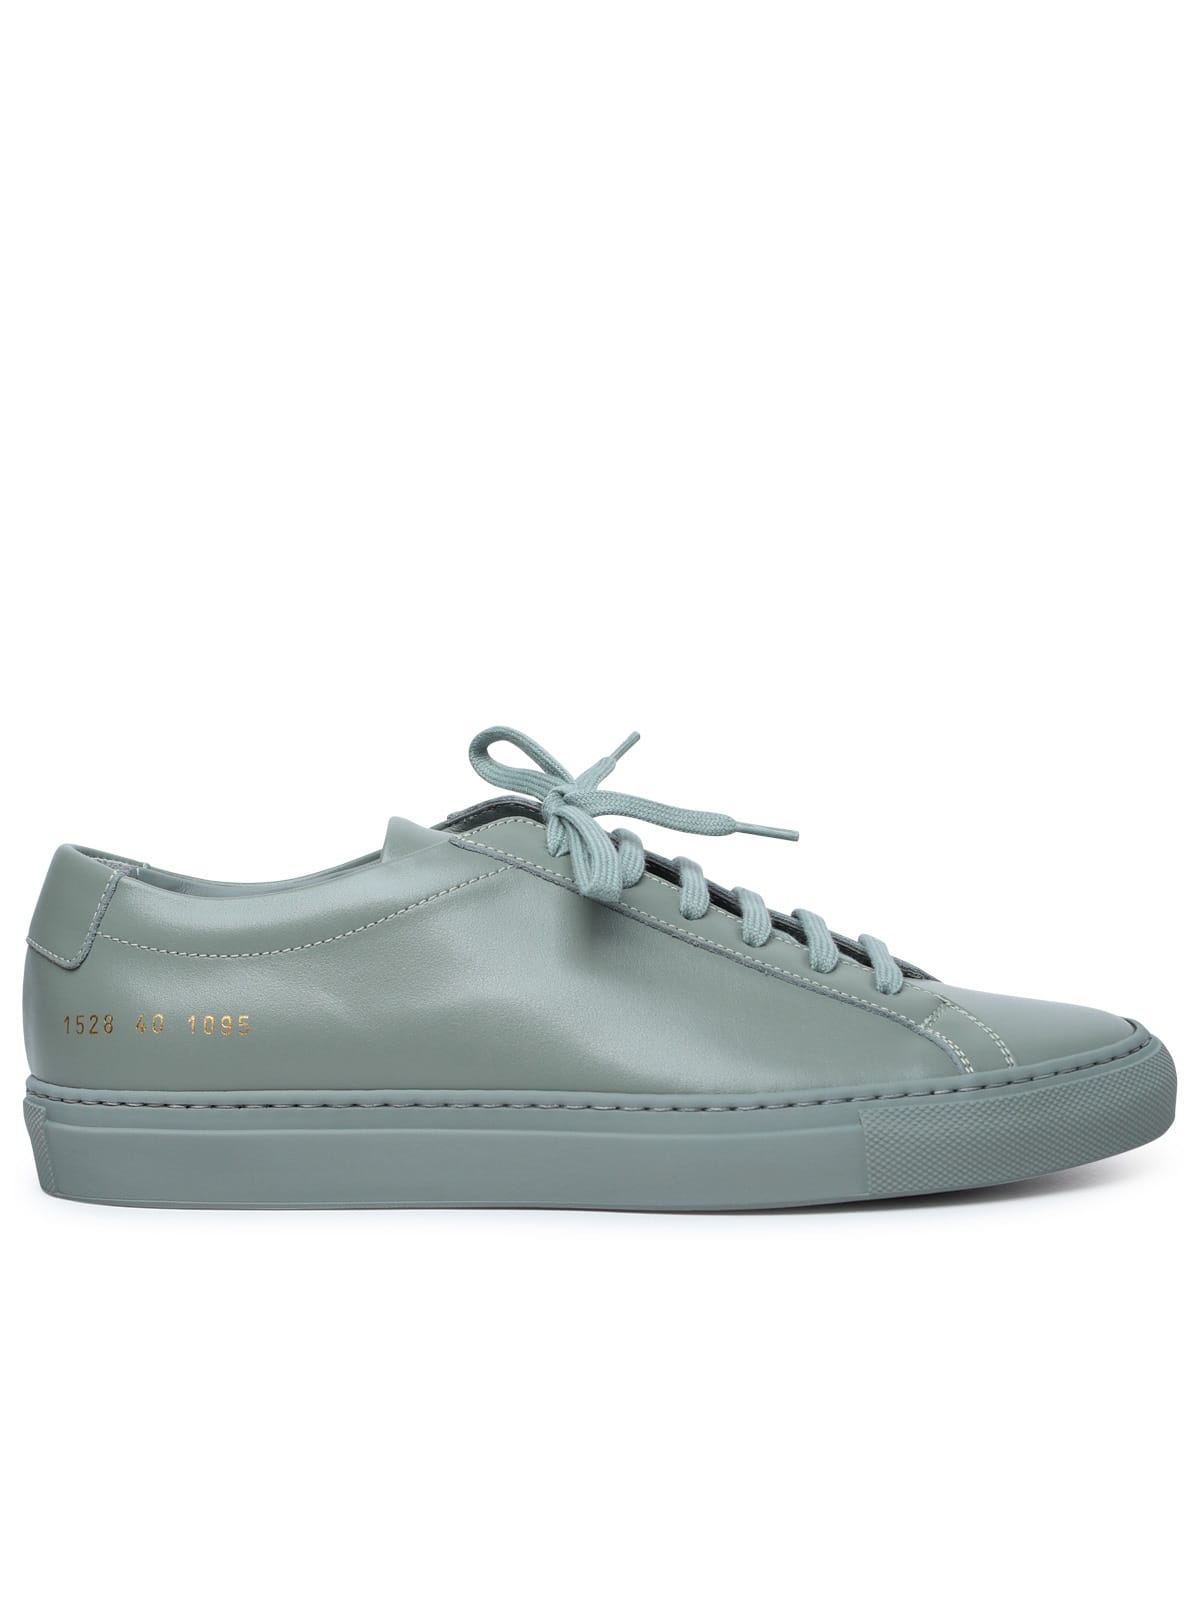 Shop Common Projects Original Achilles Vintage Green Leather Sneakers